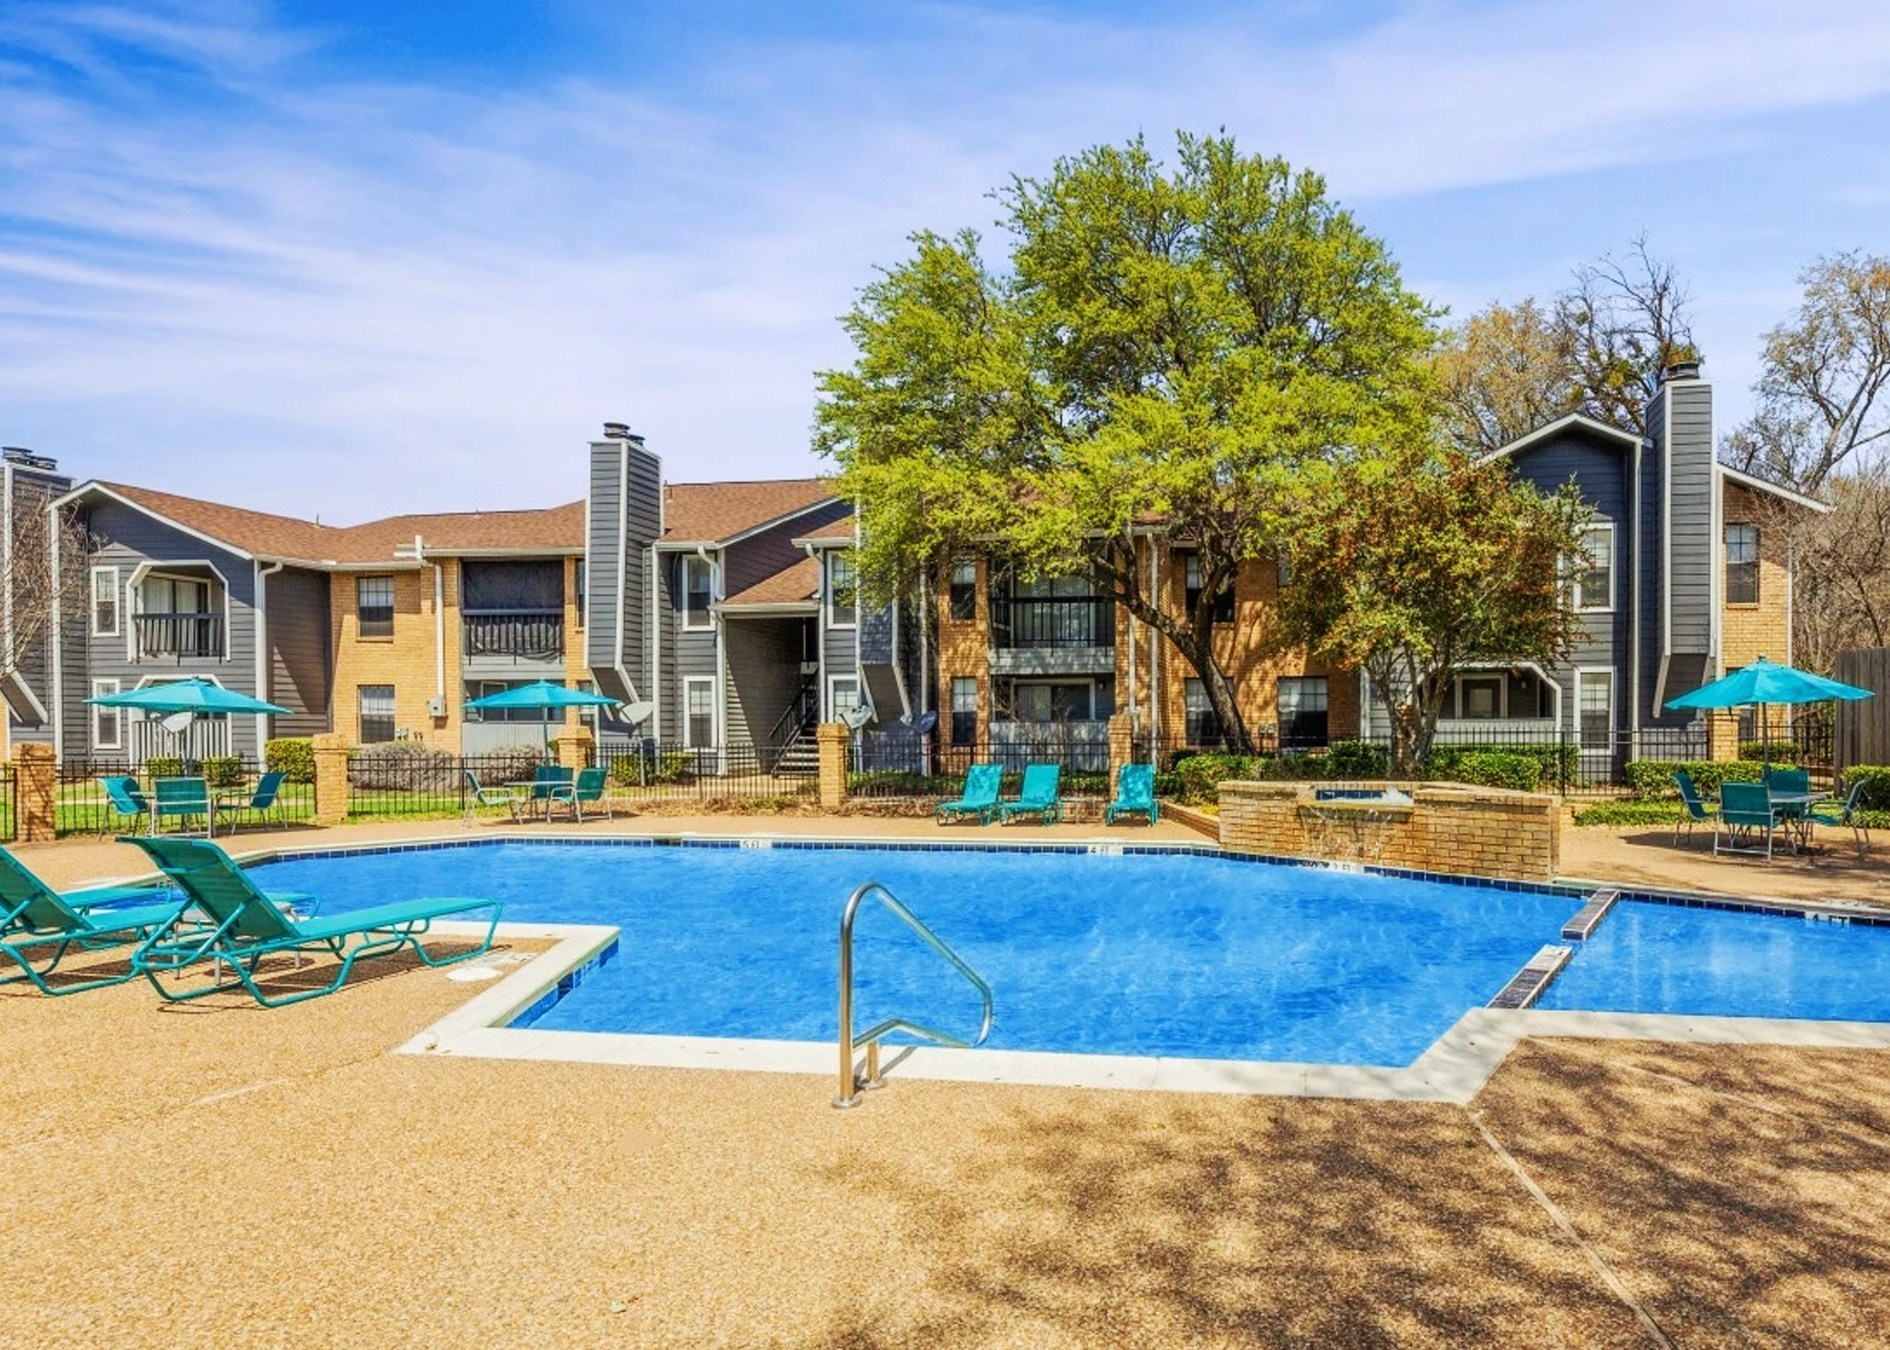 Cove Capital Investments Acquires Value-Add 159-Unit Multifamily Community in Growing Dallas Fort-Worth Neighborhood